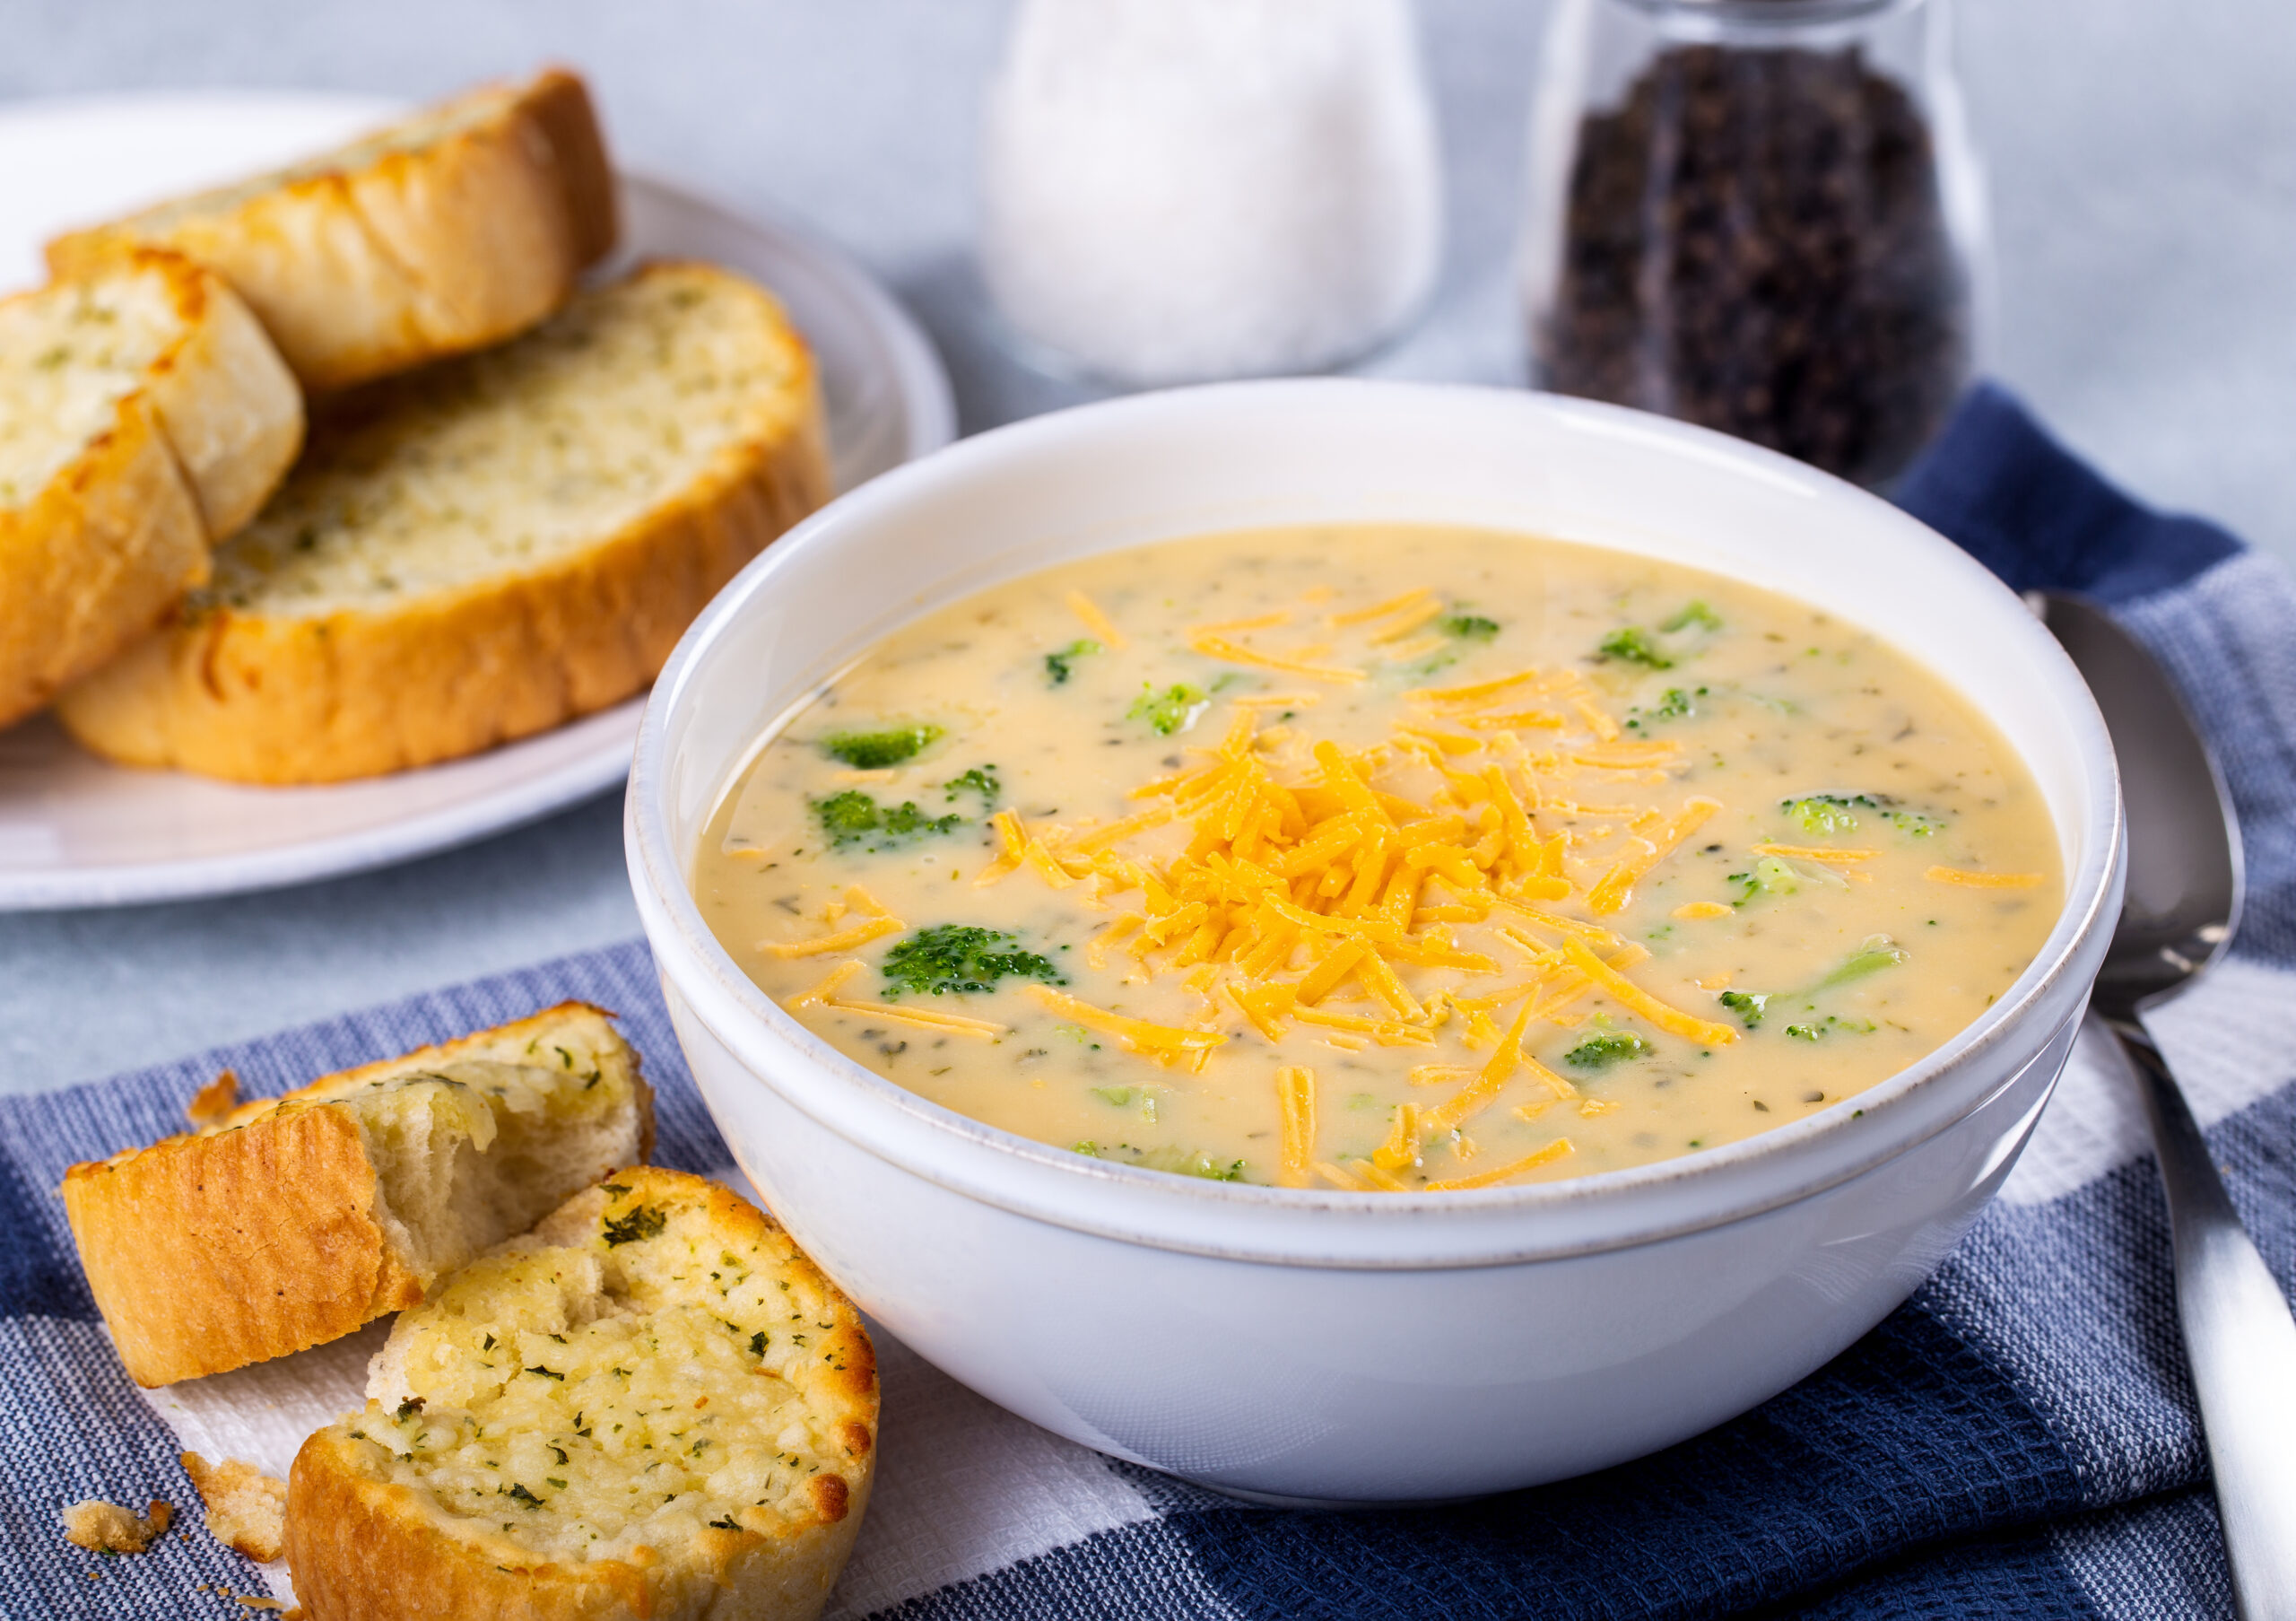 Crockpot broccoli cheese soup in a bowl next to crusty buttered bread